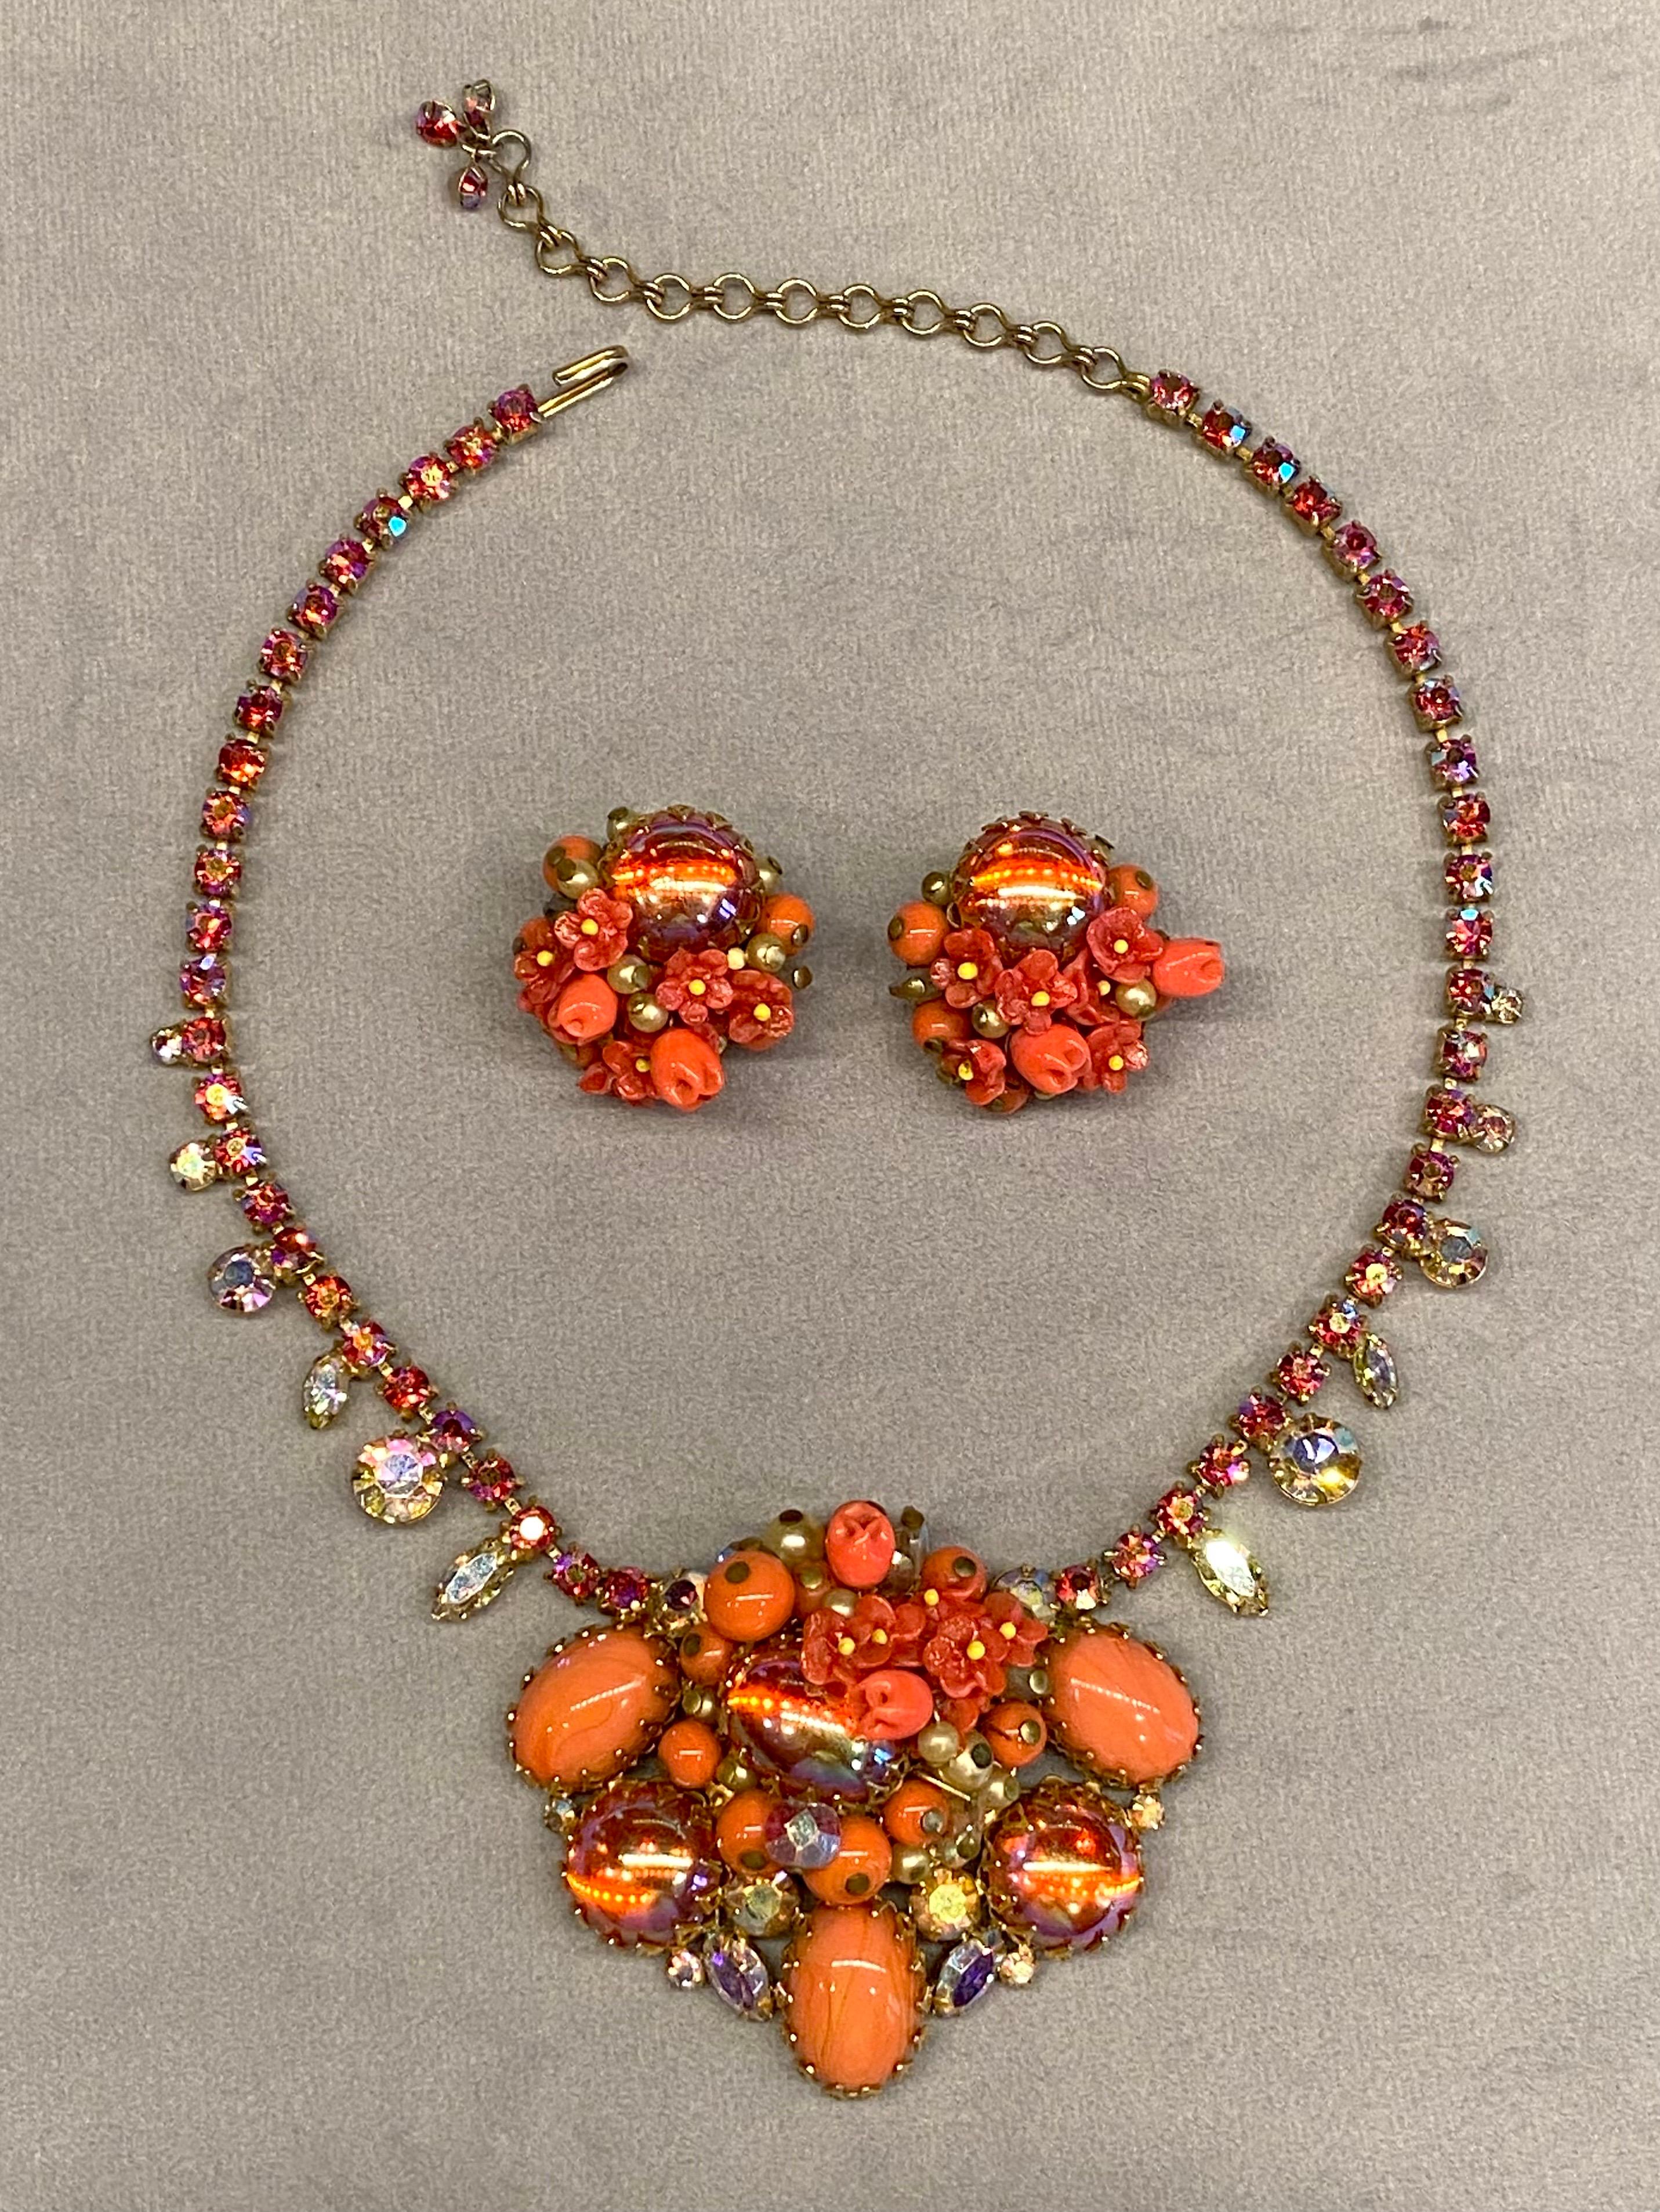 This beautiful unsigned 1950s jewelry set is truly eye catching and unique. It features beautiful coral glass and dragon breath cabochons in the 2.5 inch wide and 2 inch tall central cluster. Additionally, there are handcrafted coral glass flowers,